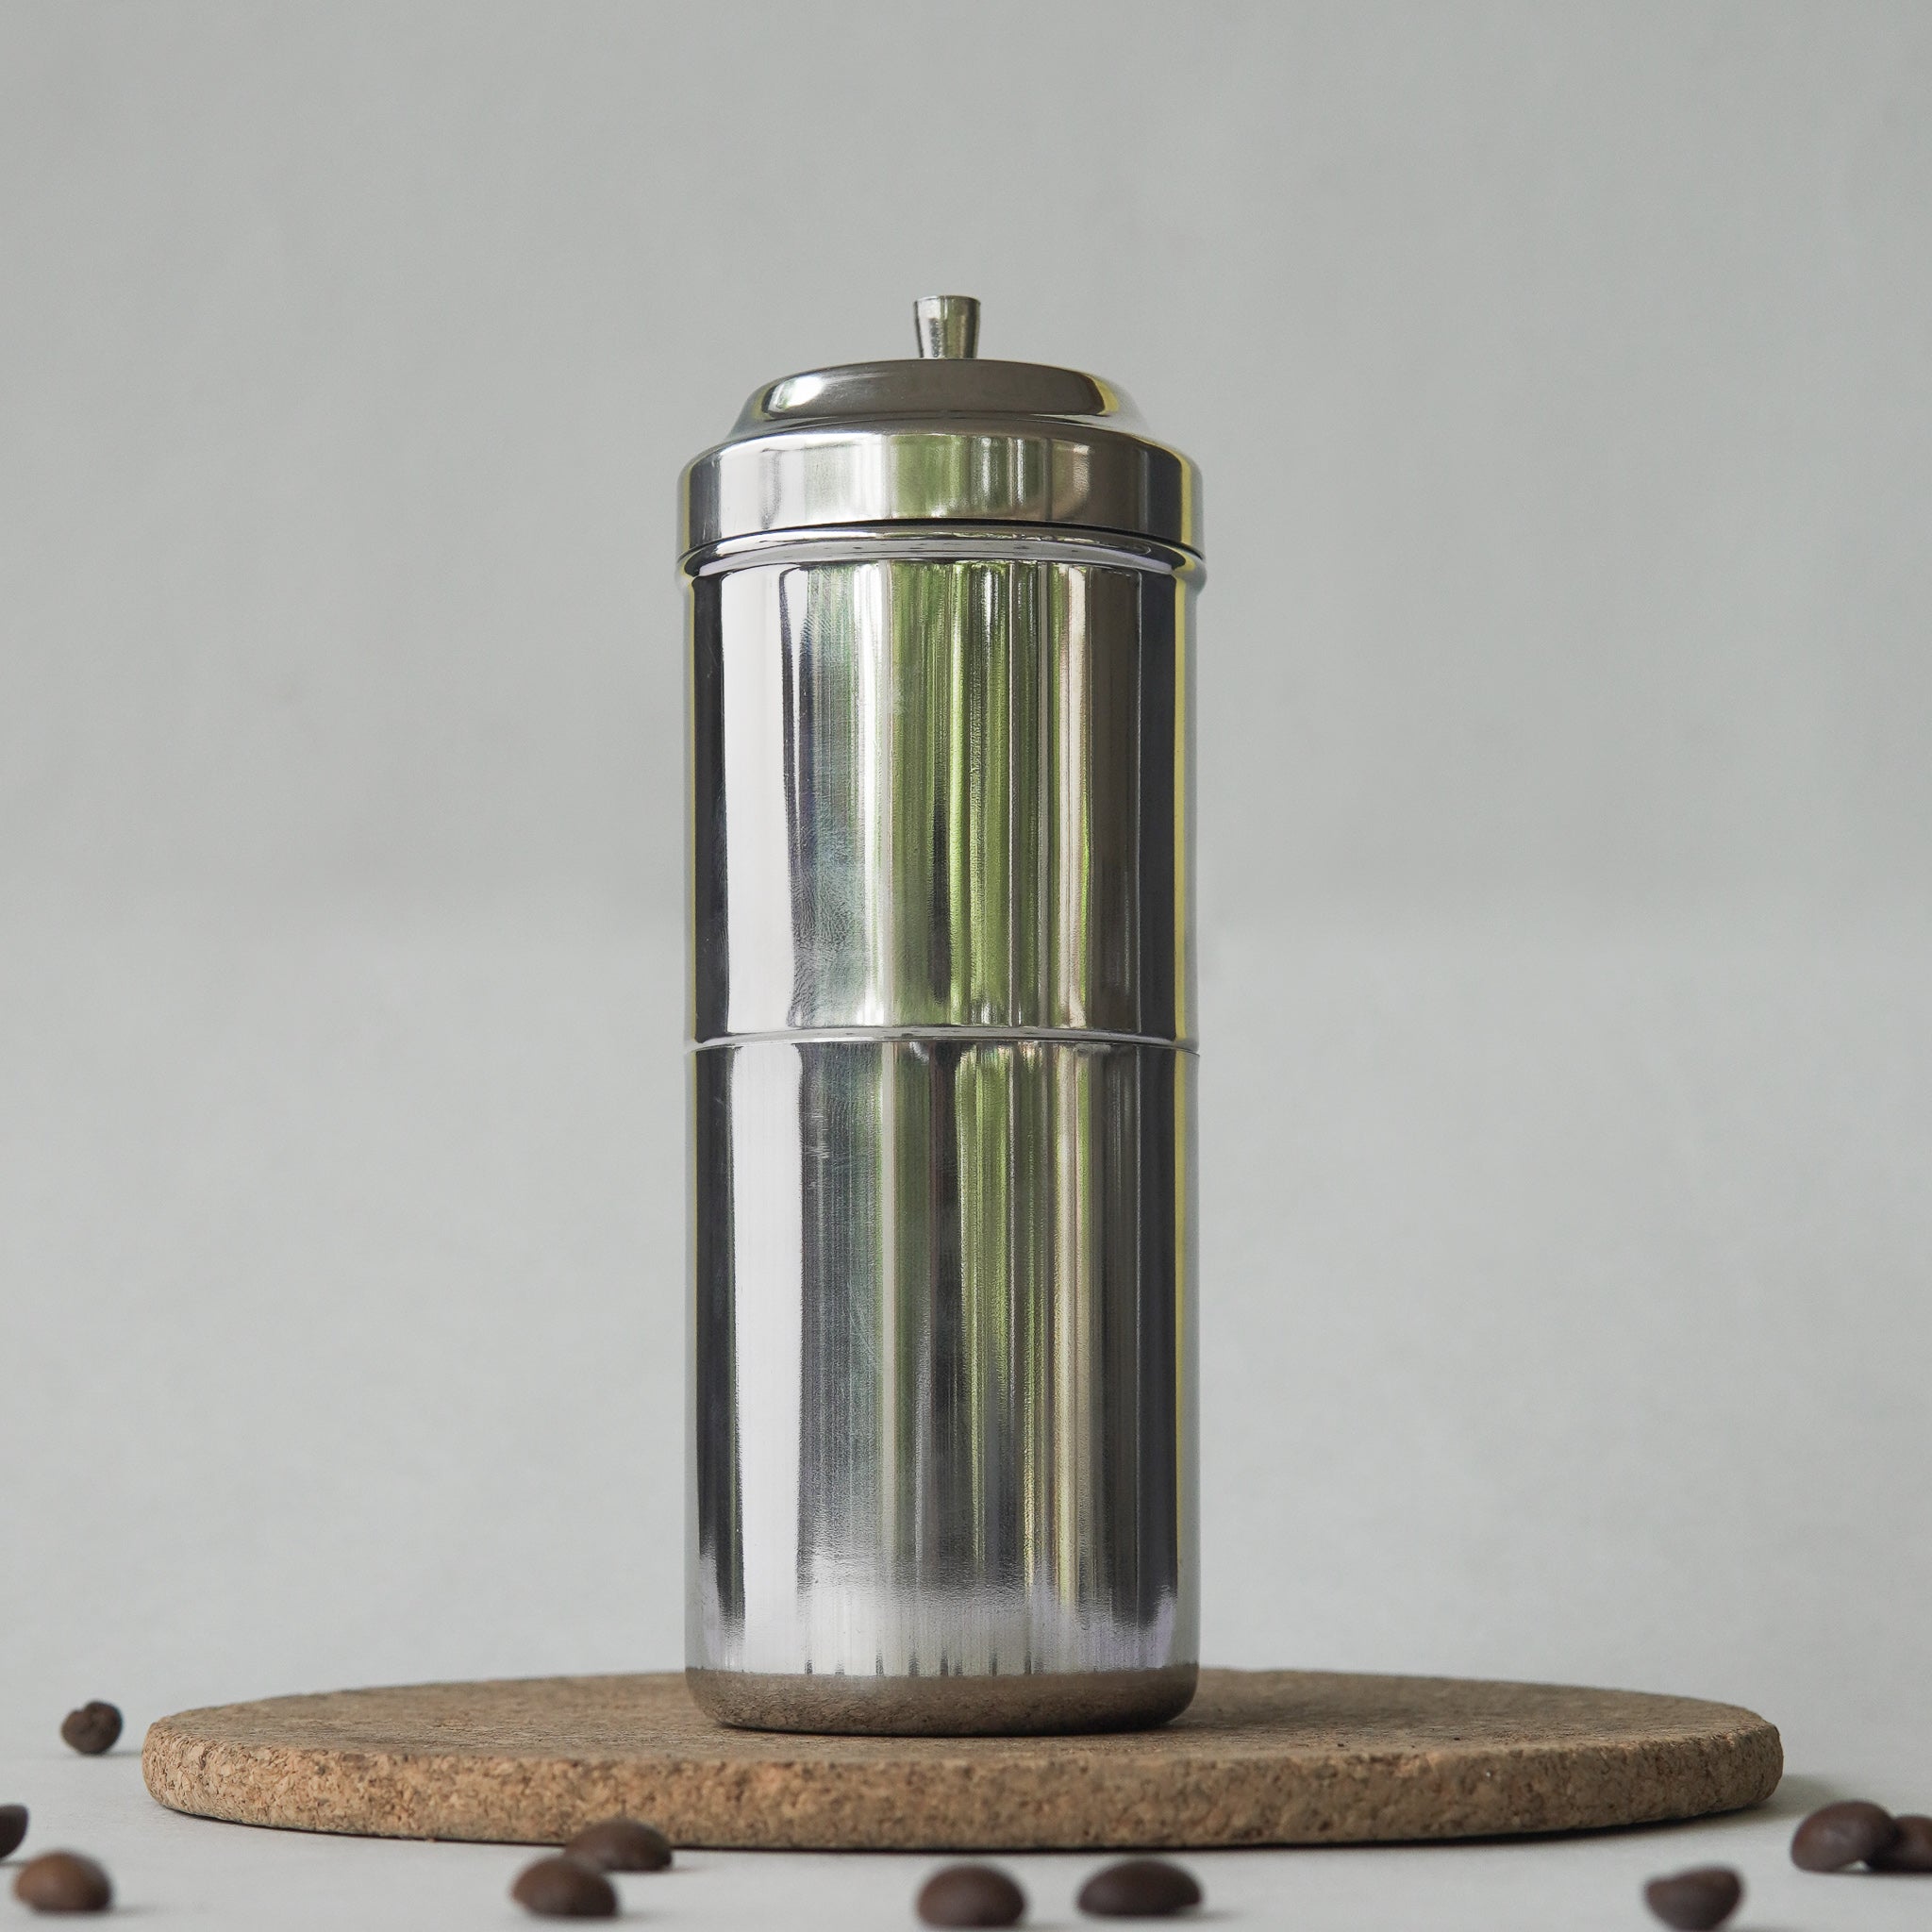 Filter Coffee Maker – The Home Products Company